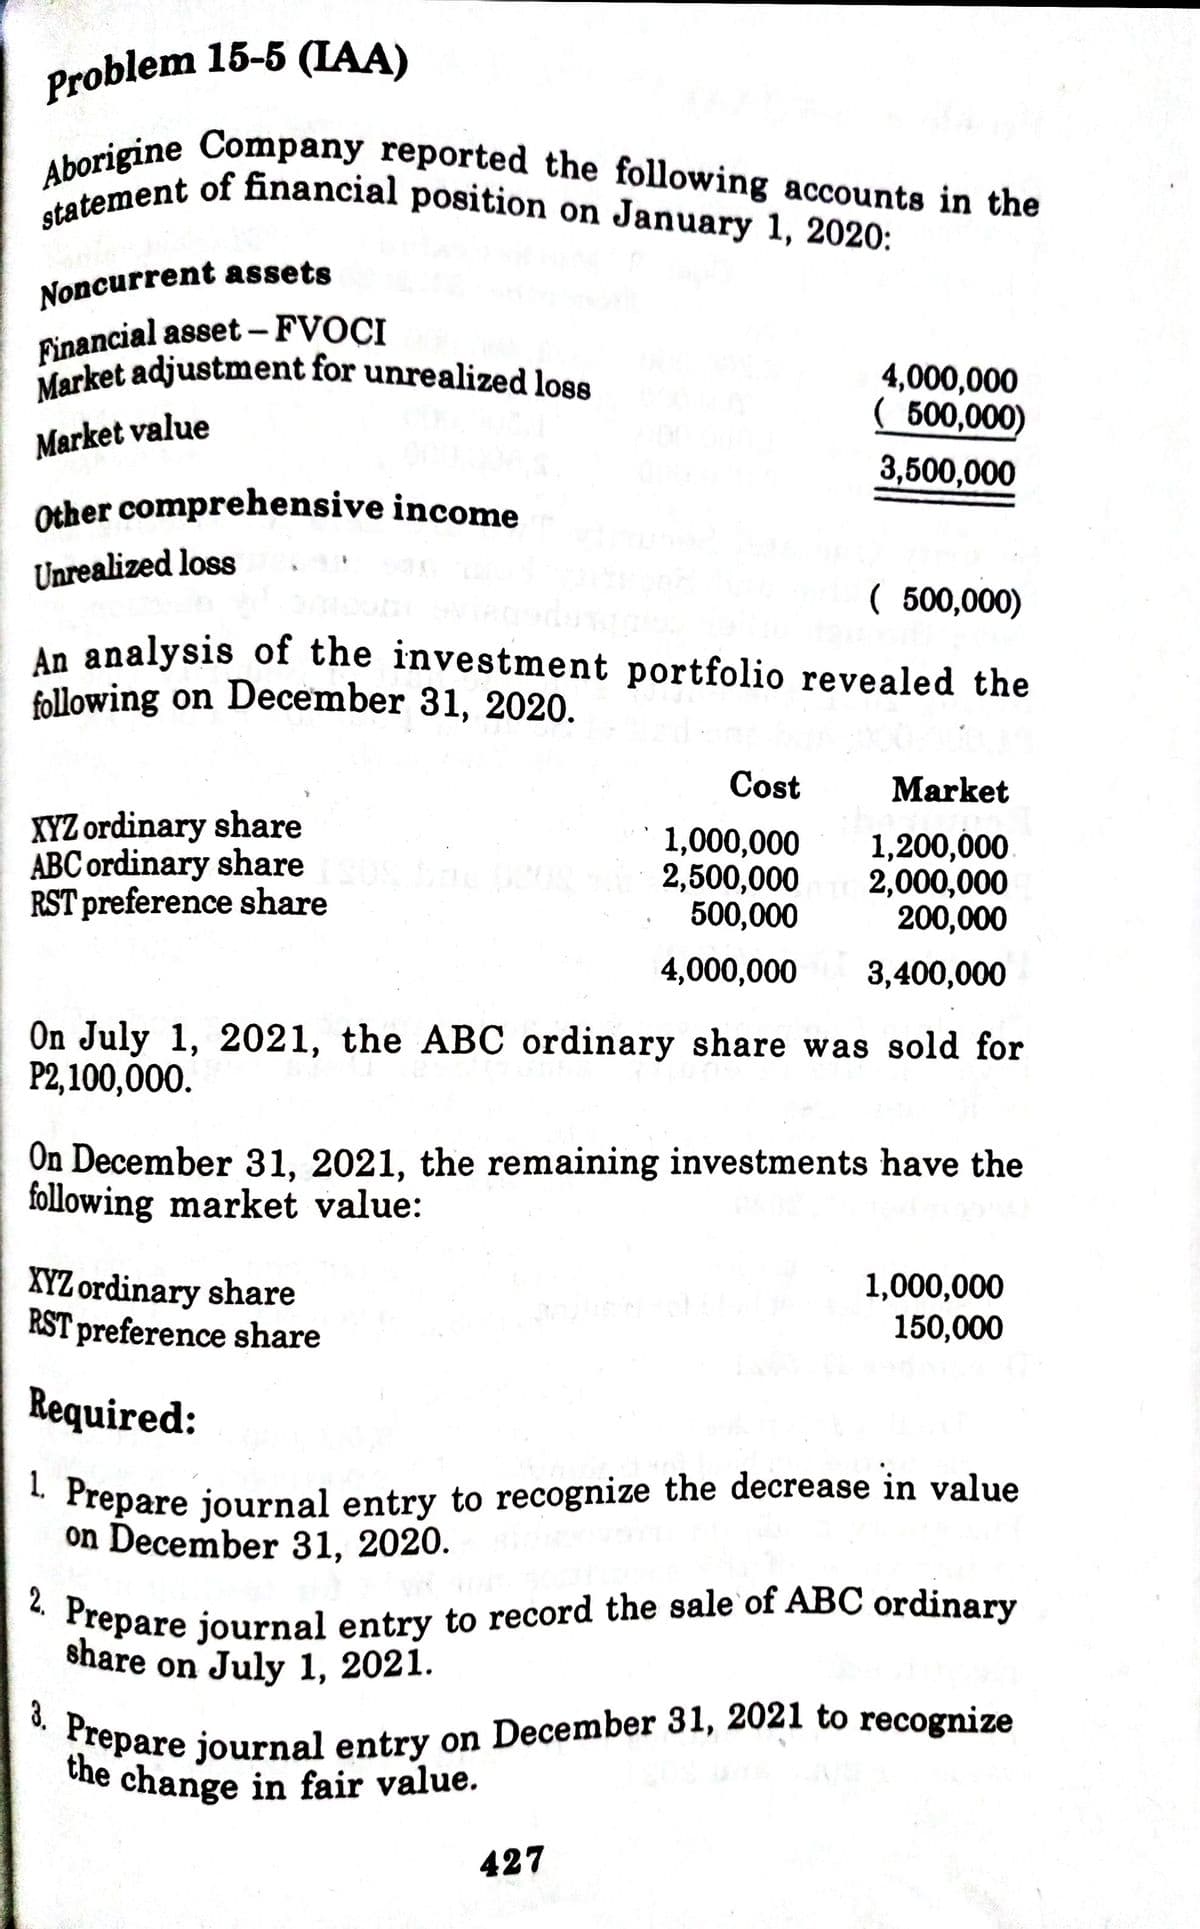 Problem 15-5 (IAA)
Prepare journal entry to record the sale`of ABC ordinary
statement of financial position on January 1, 2020:
Aborigine Company reported the following accounts in the
share on July 1, 2021.
Market adjustment for unrealized loss
the change in fair value.
3. Prepare journal entry on December 31, 2021 to recognize
A tement of hnancial position on January 1, 2020:
Noncurrent assets
Financial asset –FVOCI
Market adjustment for unrealized loss
4,000,000
( 500,000)
Market value
3,500,000
Other comprehensive income
Unrealized loss
( 500,000)
An analysis of the investment portfolio revealed the
following on December 31, 2020.
Cost
Market
XYZ ordinary share
ABC ordinary share
RST preference share
1,000,000
2,500,000
500,000
1,200,000
2,000,000
200,000
4,000,000
3,400,000
On July 1, 2021, the ABC ordinary share was sold for
P2,100,000.
On December 31, 2021, the remaining investments have the
following market value:
XYZ ordinary share
RST preference share
1,000,000
150,000
Required:
* Prepare journal entry to recognize the decrease in value
on December 31, 2020.
2.
427
